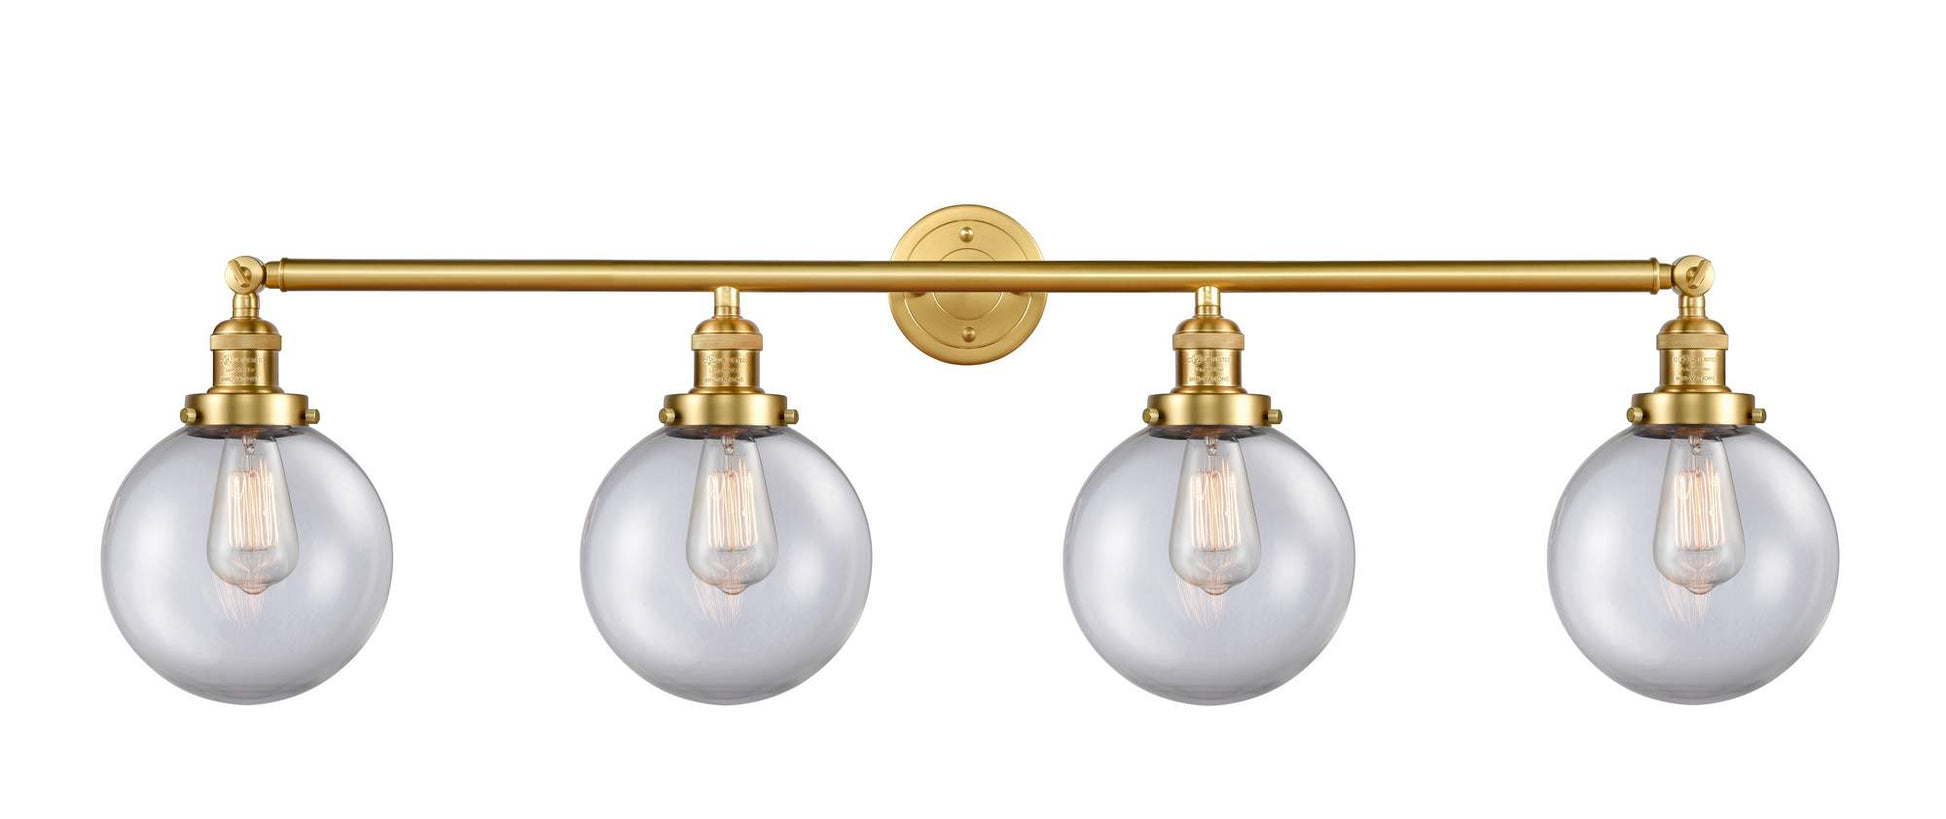 215-SG-G202-8 4-Light 44" Satin Gold Bath Vanity Light - Clear Beacon Glass - LED Bulb - Dimmensions: 44 x 9.125 x 14.125 - Glass Up or Down: Yes